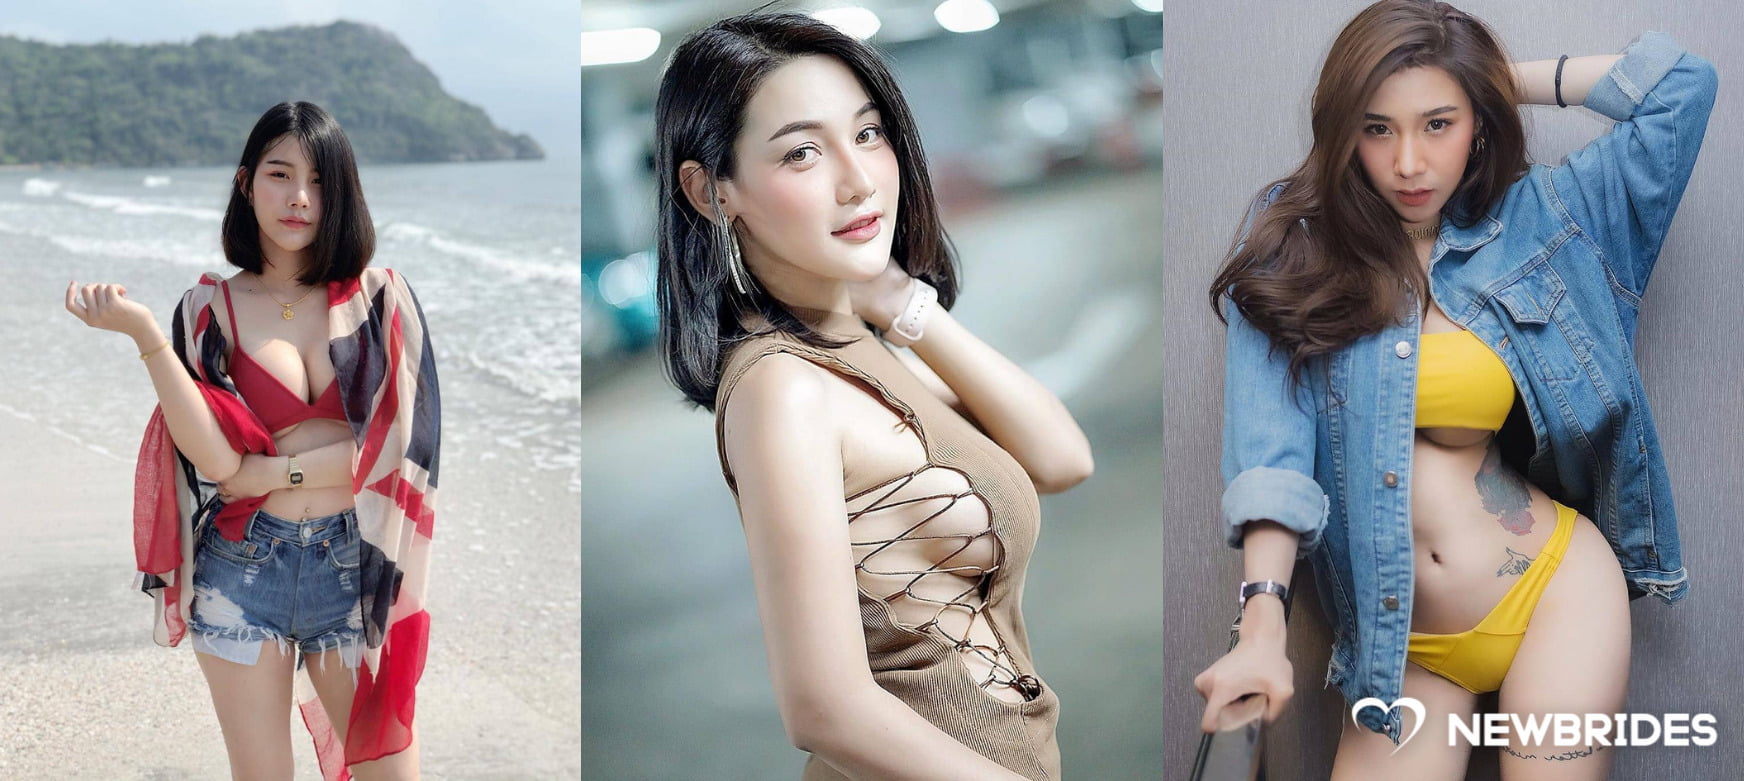 Pictures Of Hot Asian Girls